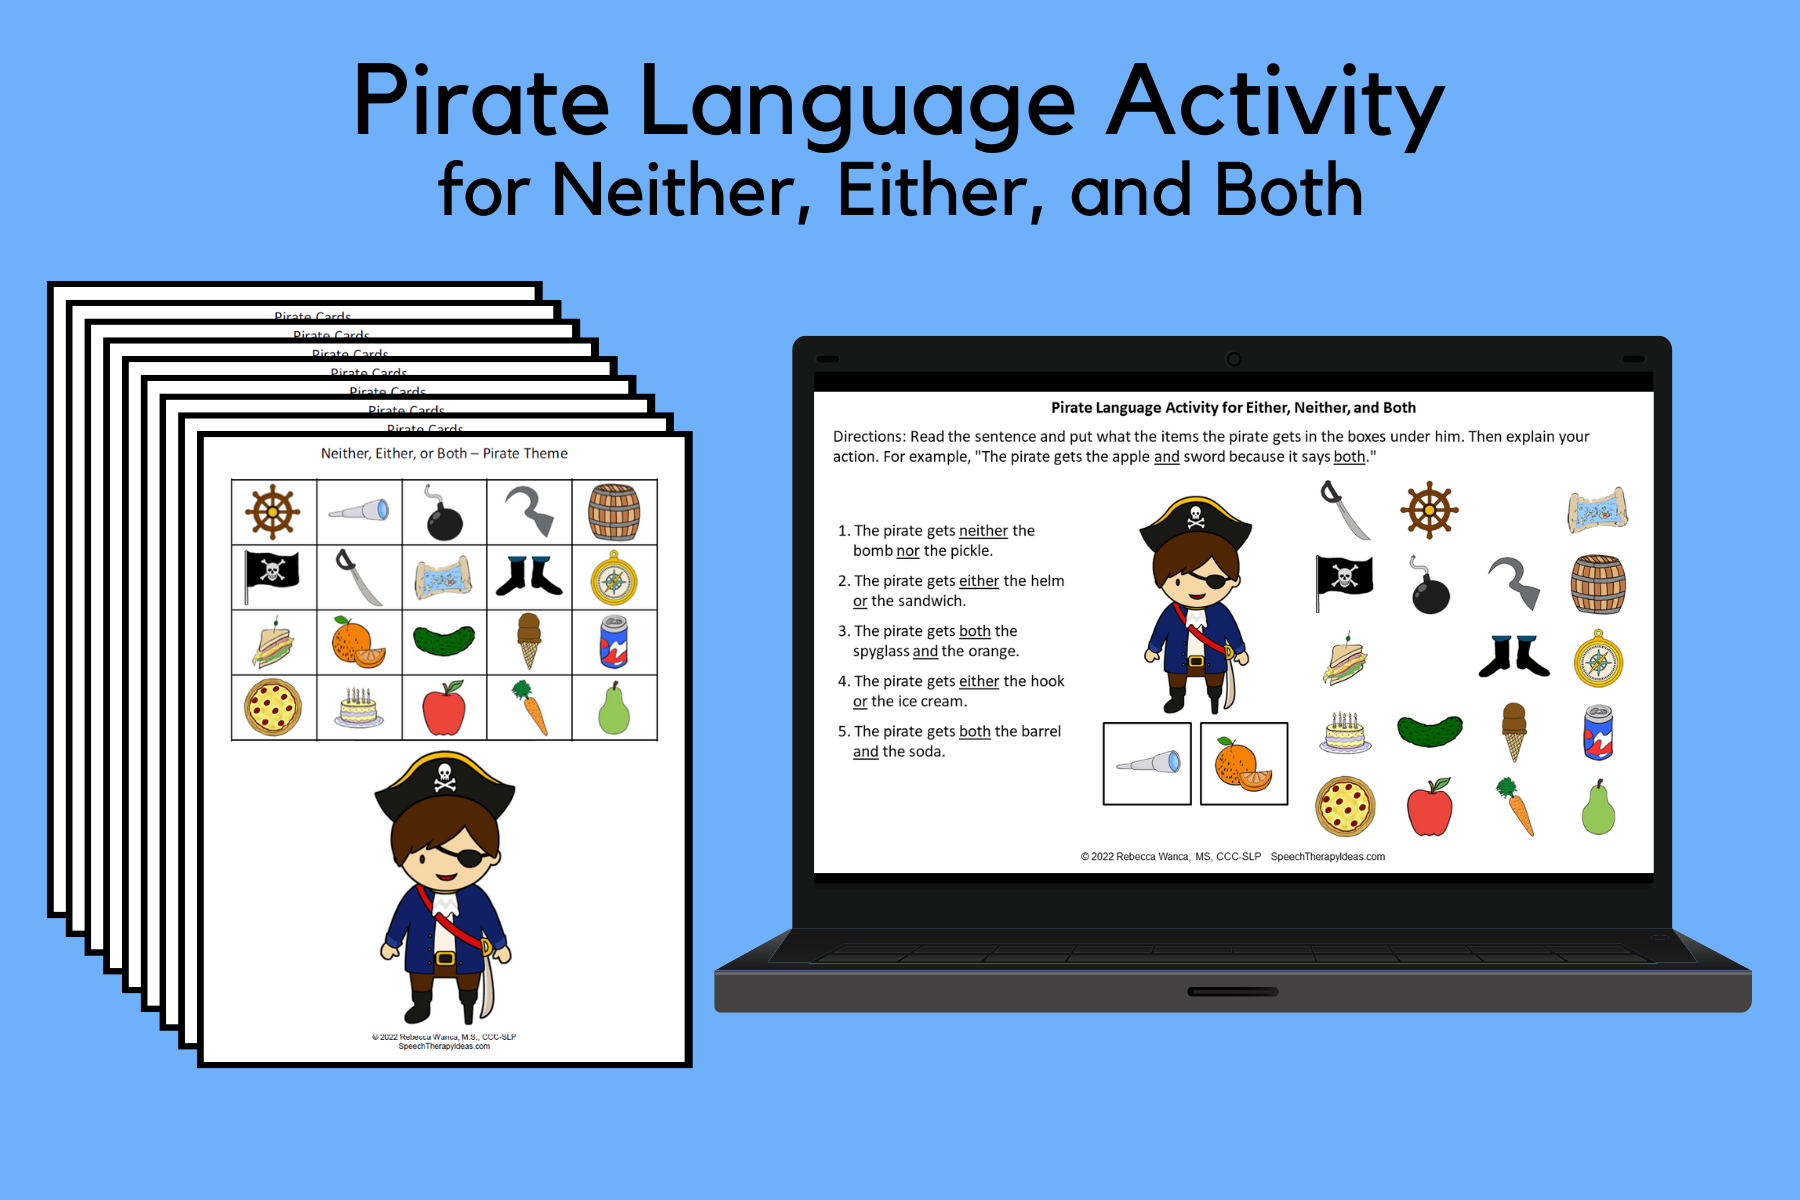 Pirate Language Activity For Neither, Either, And Both